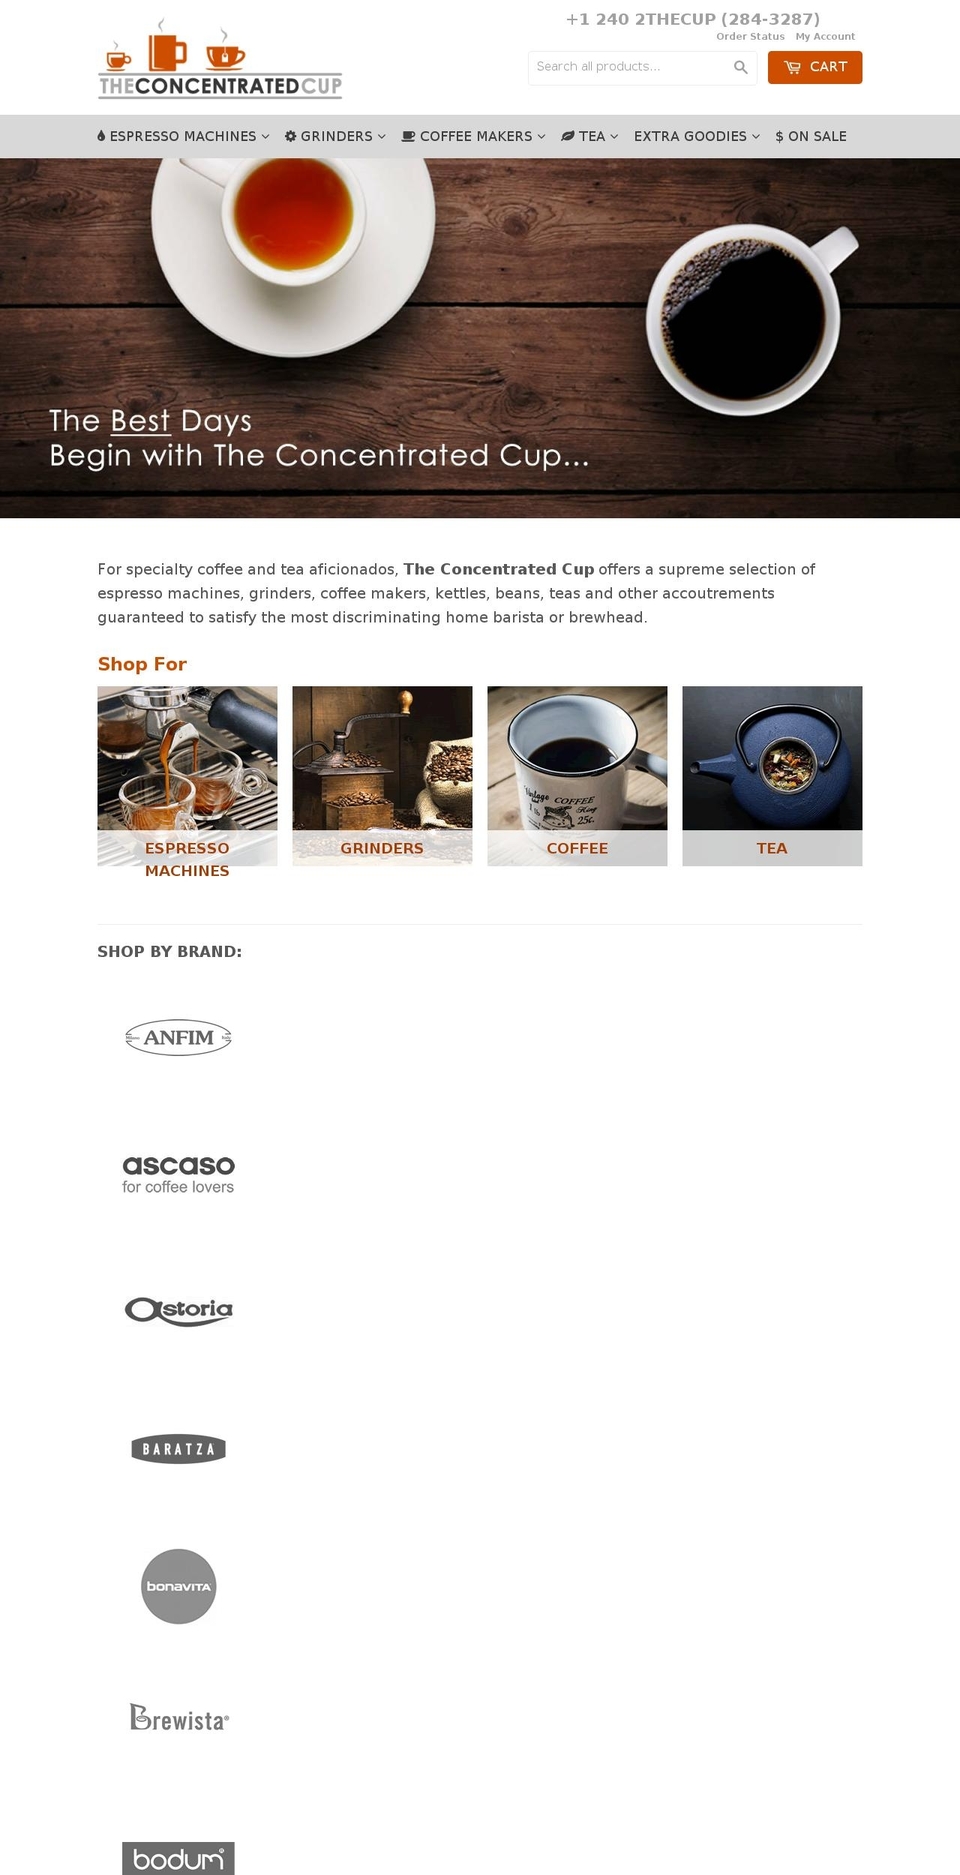 dsl-1 Shopify theme site example theconcentratedcup.com